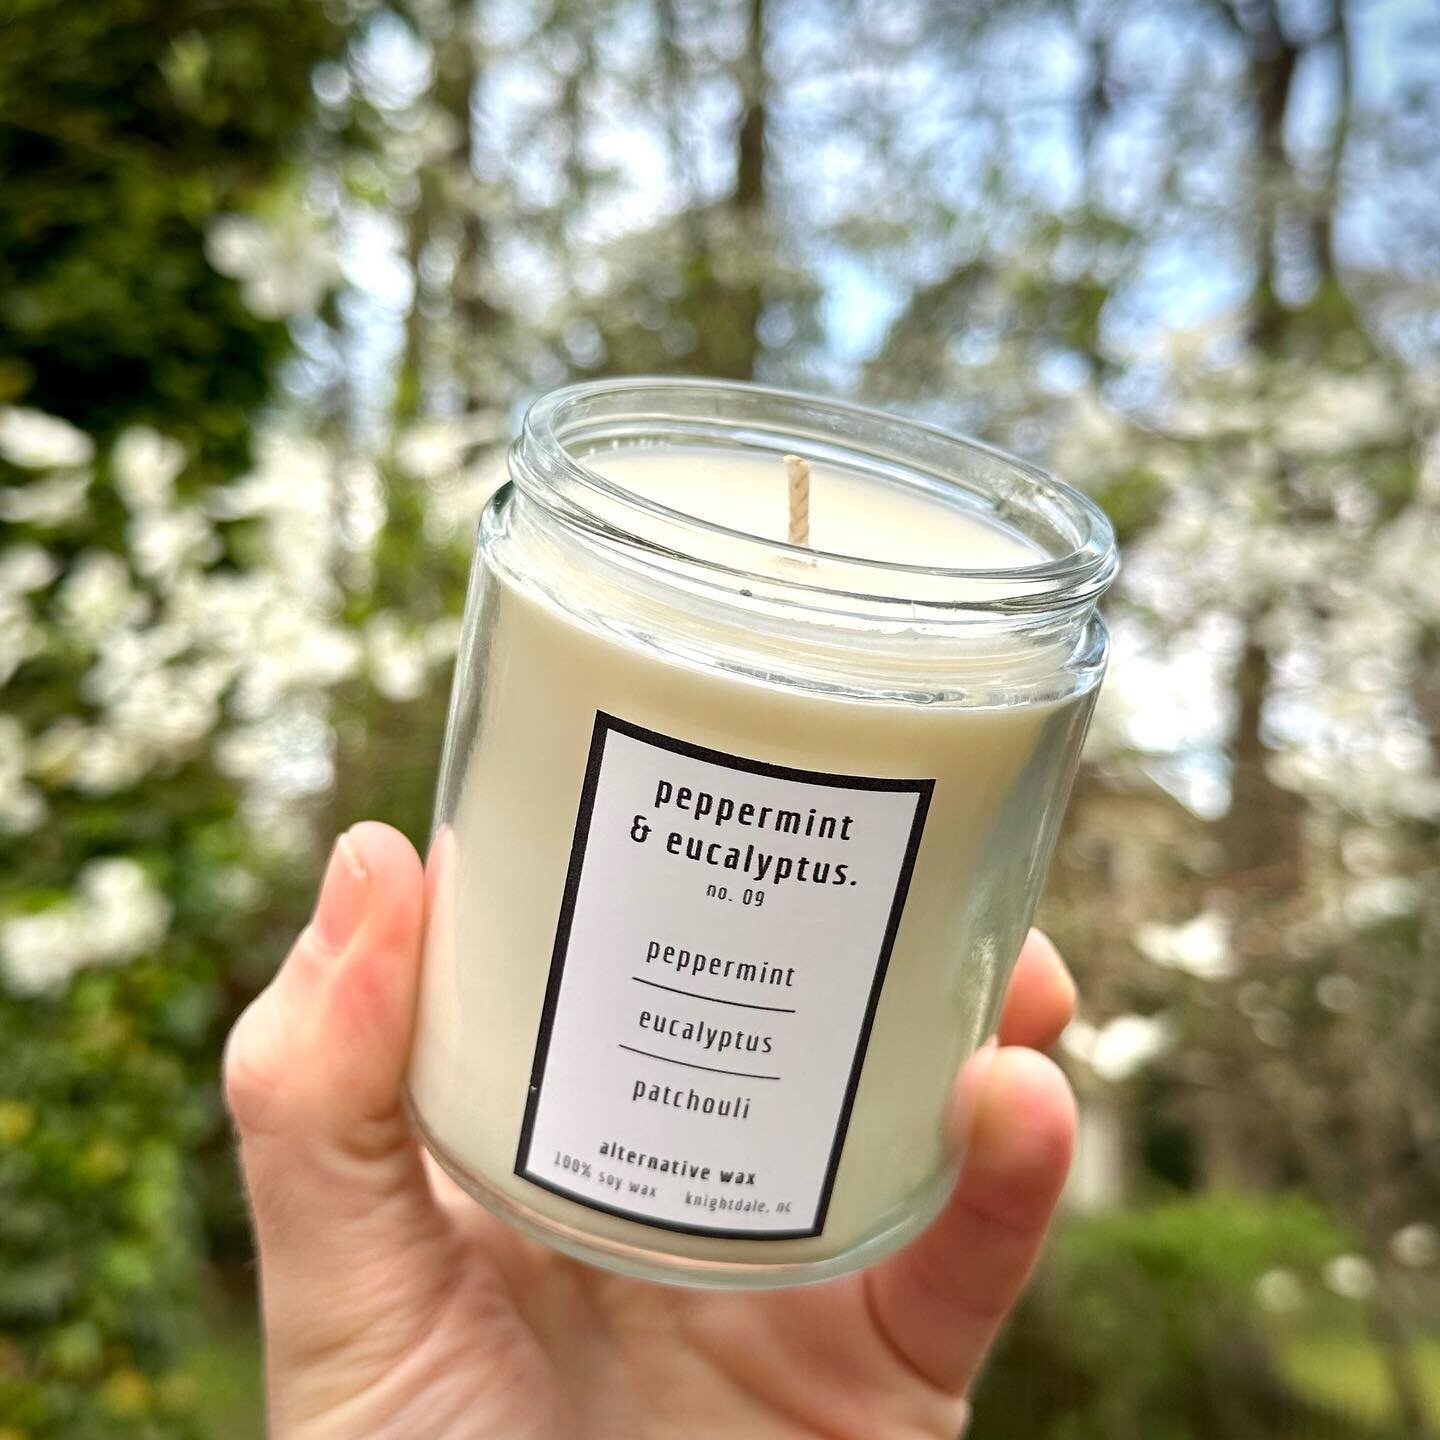 Soothing peppermint is the perfect scent for the hot summer days heading our way! 🌤️😍 #peppermint #spring #summer #soywax #alternativewax #youburnityoubuyit #serenity #eucalyptus #sunny #shopraleigh #knightdale